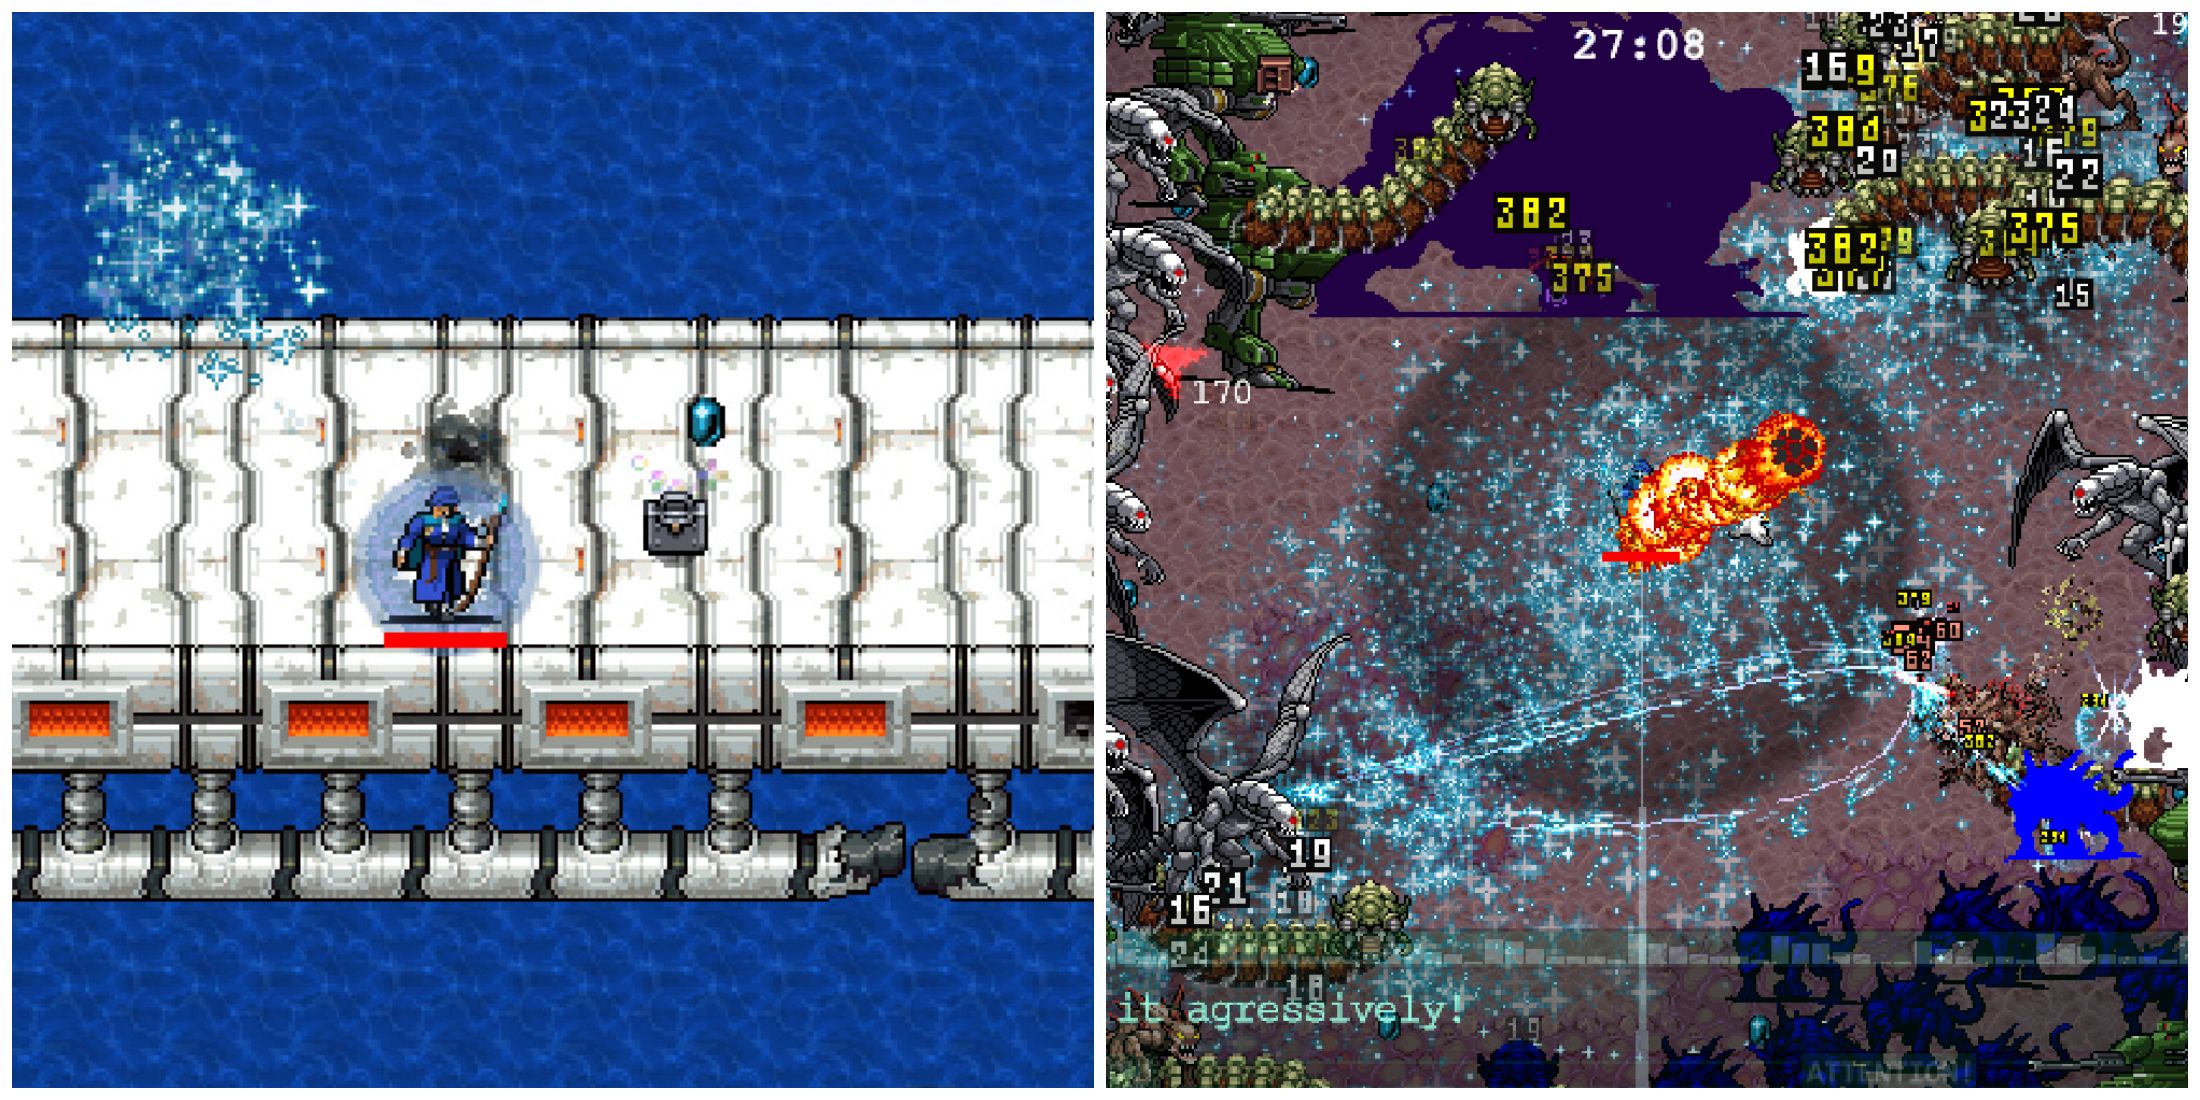 Split image of the Weapon Power Up and a player battling enemies in the new Neo Galuga map in Vampire Survivors